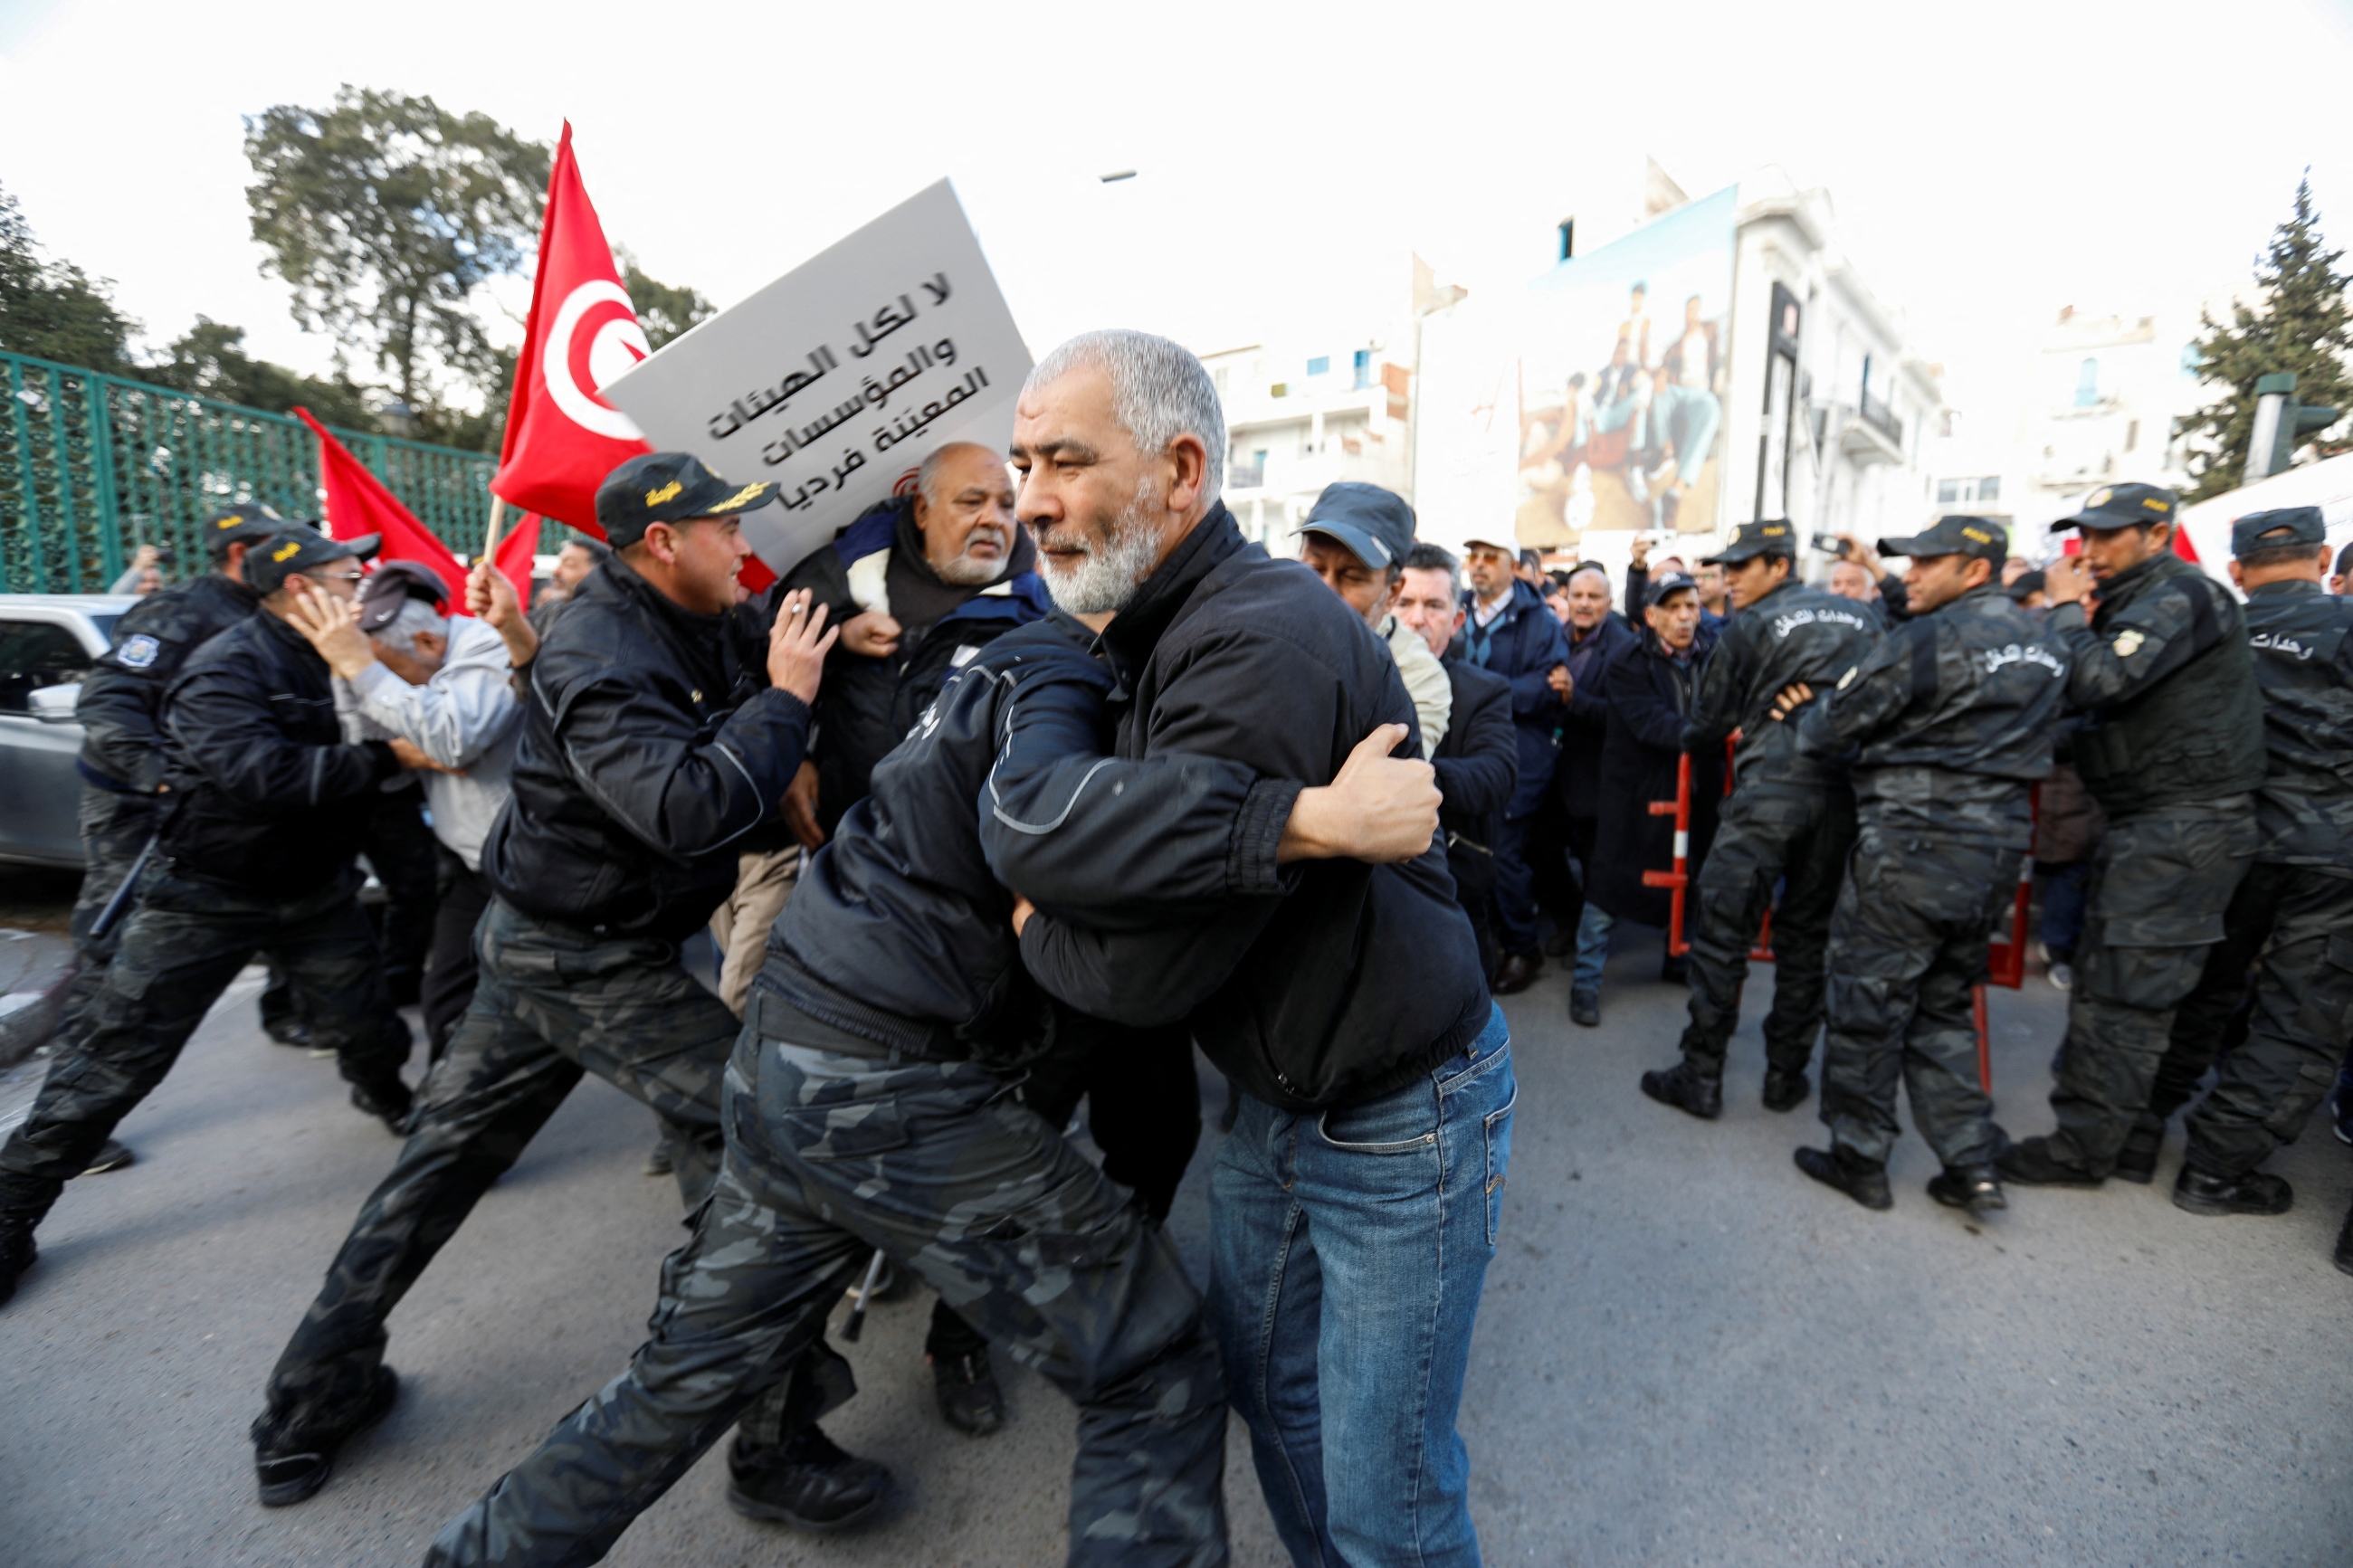 Police clash with demonstrators during a protest against Tunisian President Kais Saied, on the anniversary of the 2011 uprising, in Tunis, 14 January 2023 (Reuters)